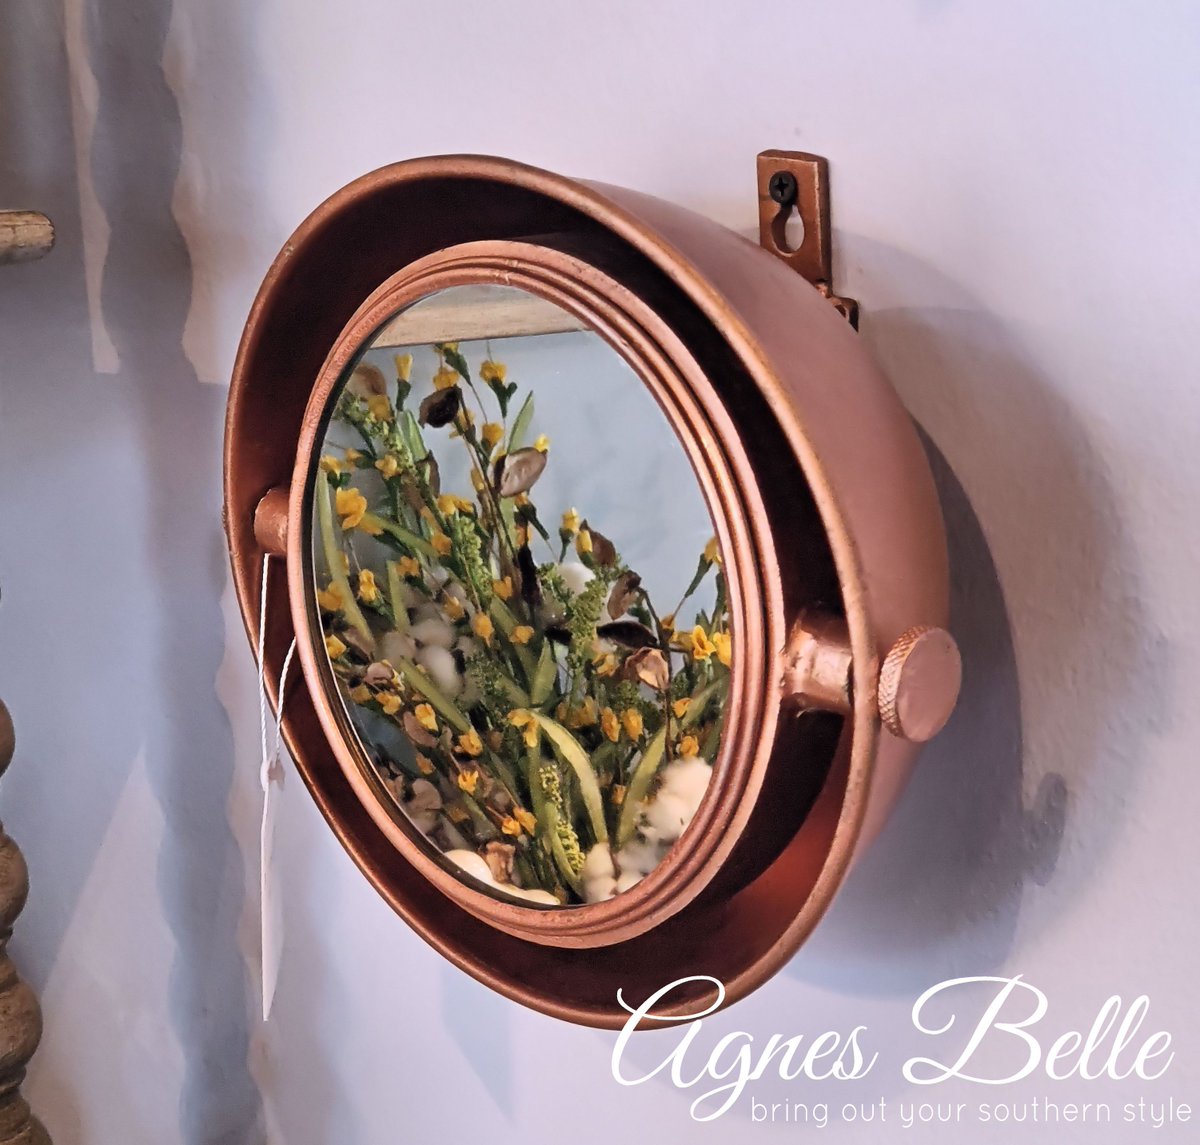 Add a small mirror to reflect light in a small space or add to a collage wall. Shop online, schedule your pickup for a future date.
.
#agnesbellevp #vintageparkhouston #homedecor #homeaccents #mirrors #smallspace #shophouston #gifts